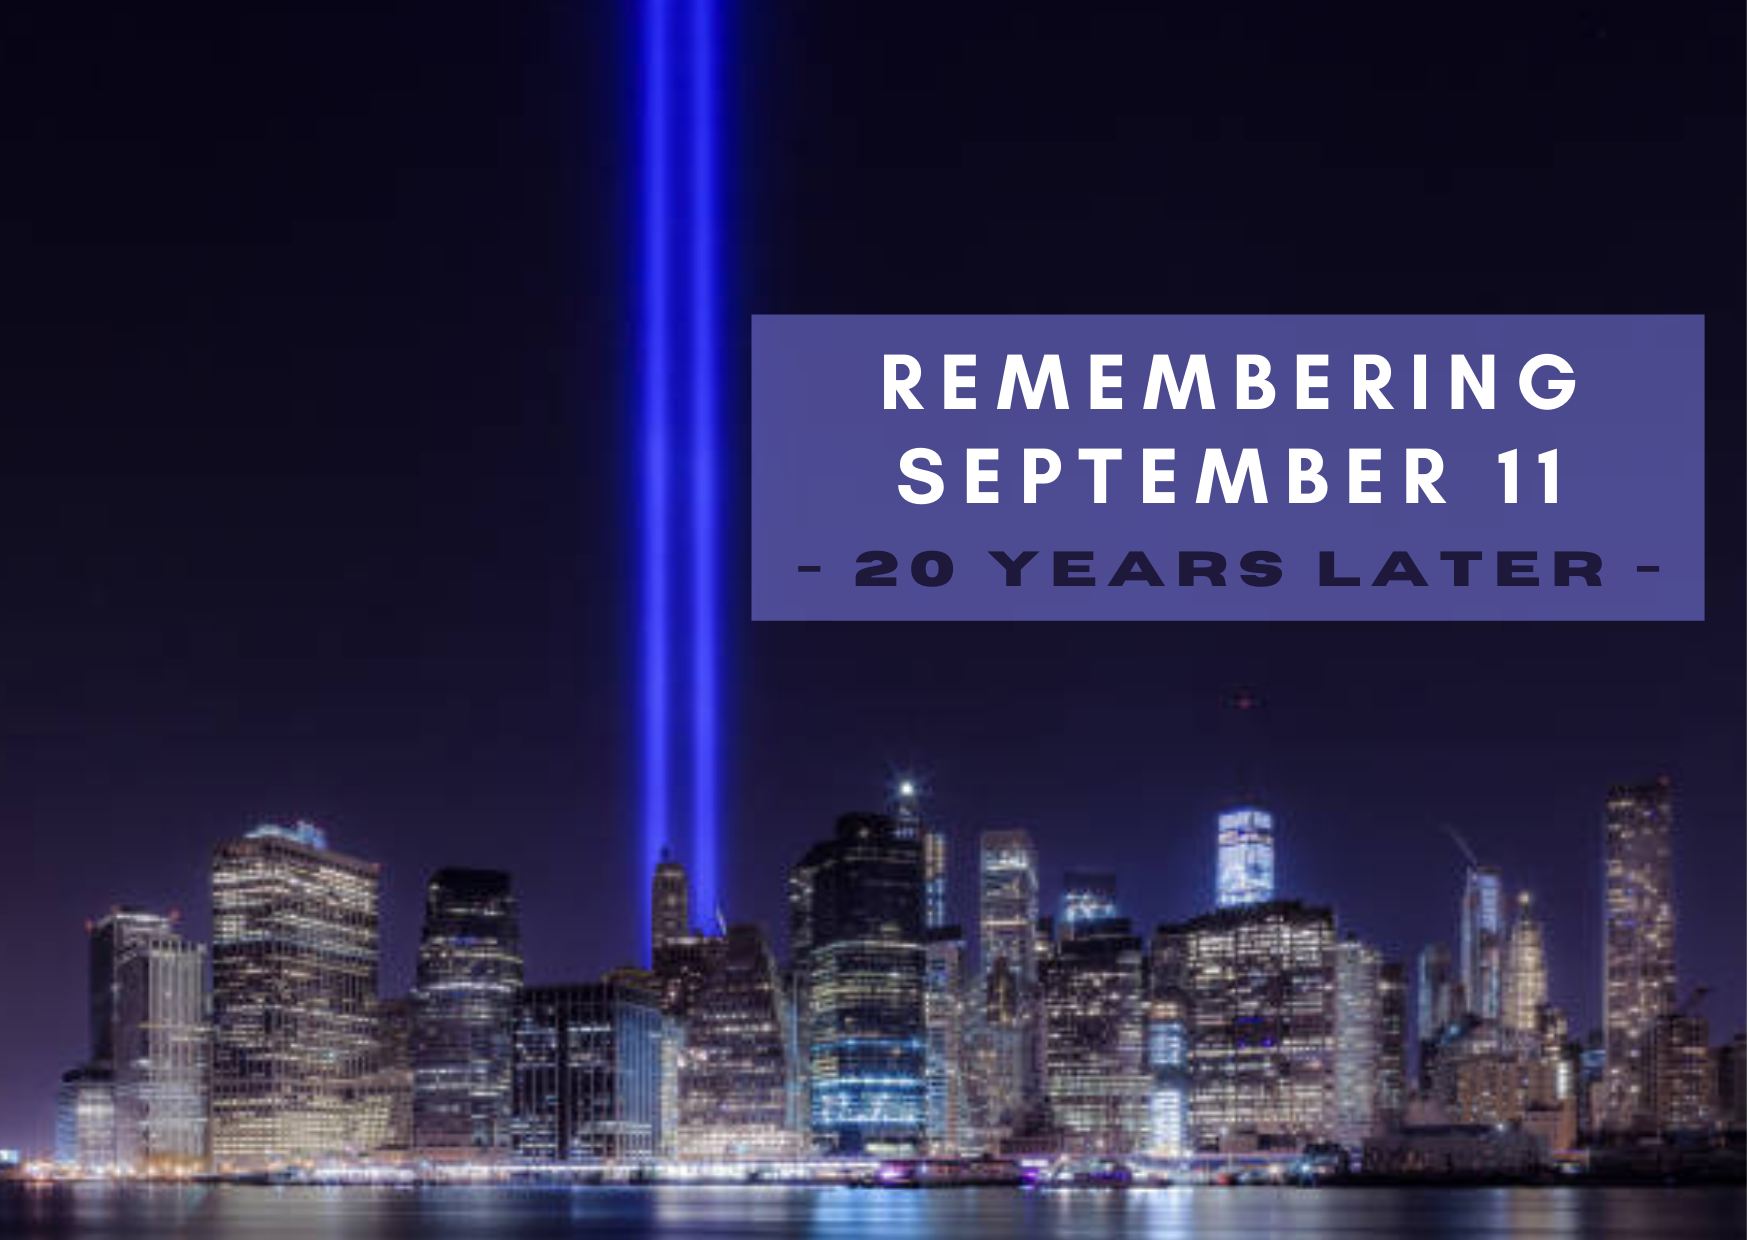 A Message From Our President: Remembering September 11th Twenty Years Later